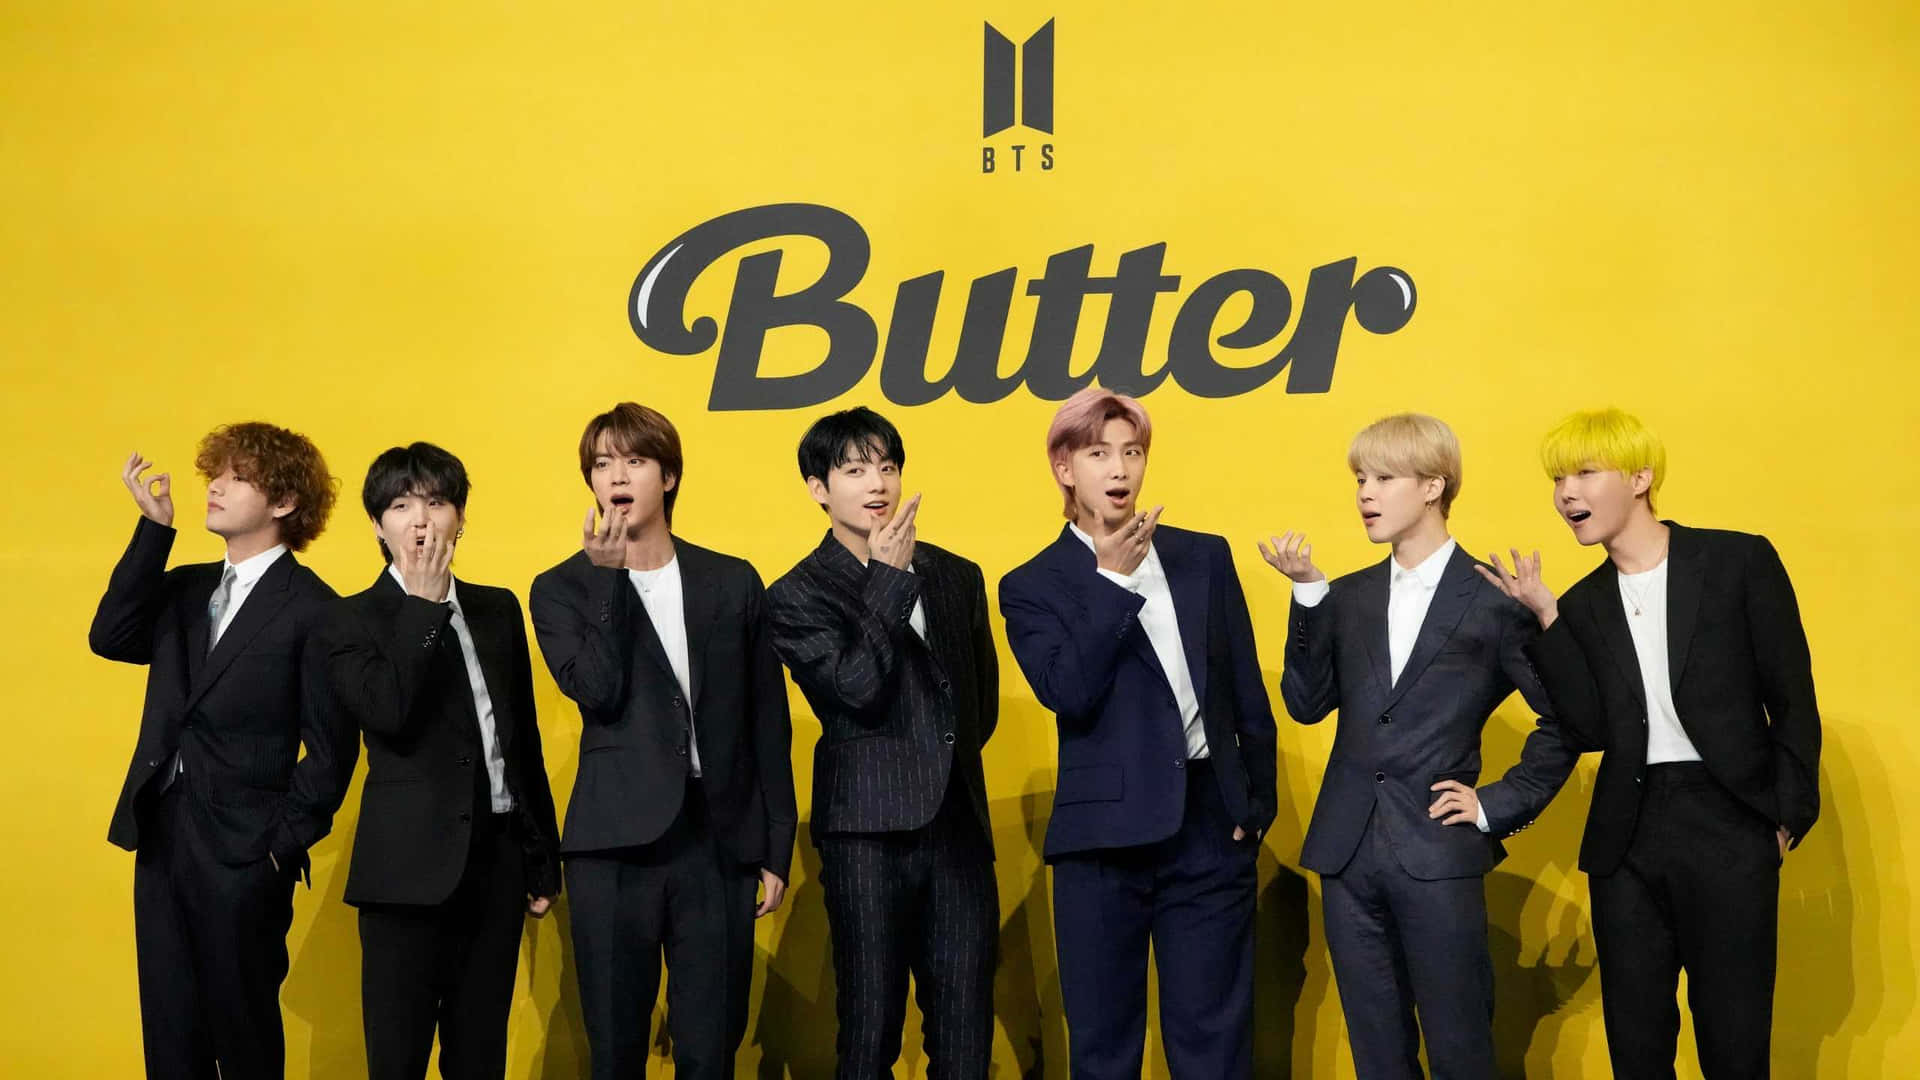 Bts Posing Backstage During The Promotional Event Of Their Hit Single "butter"